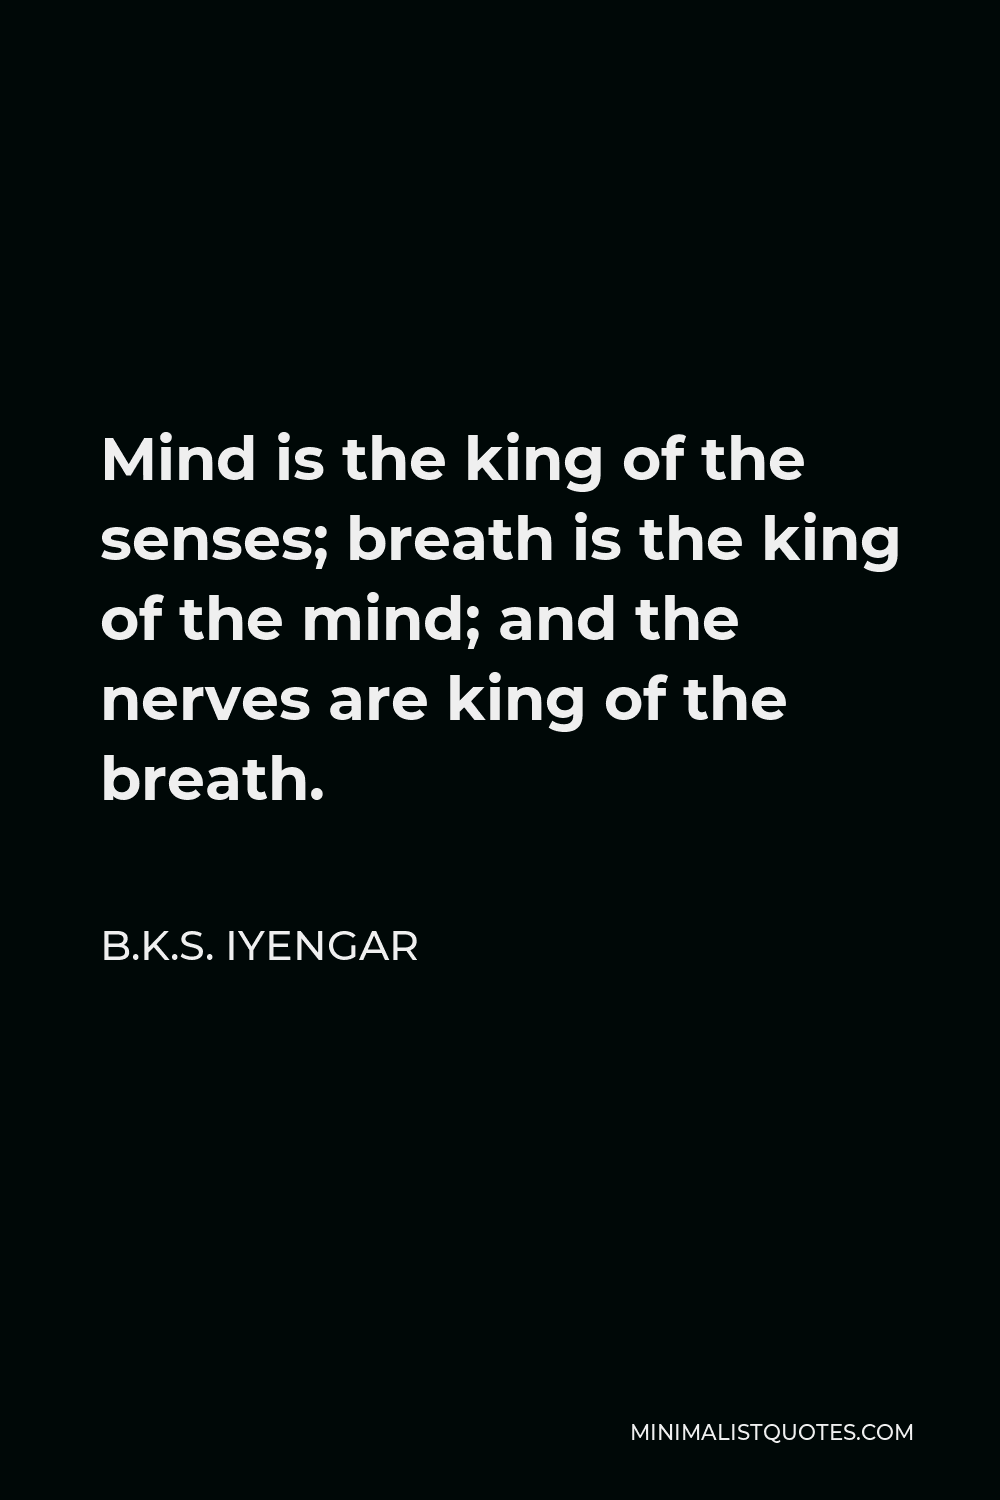 B.K.S. Iyengar Quote - Mind is the king of the senses; breath is the king of the mind; and the nerves are king of the breath.